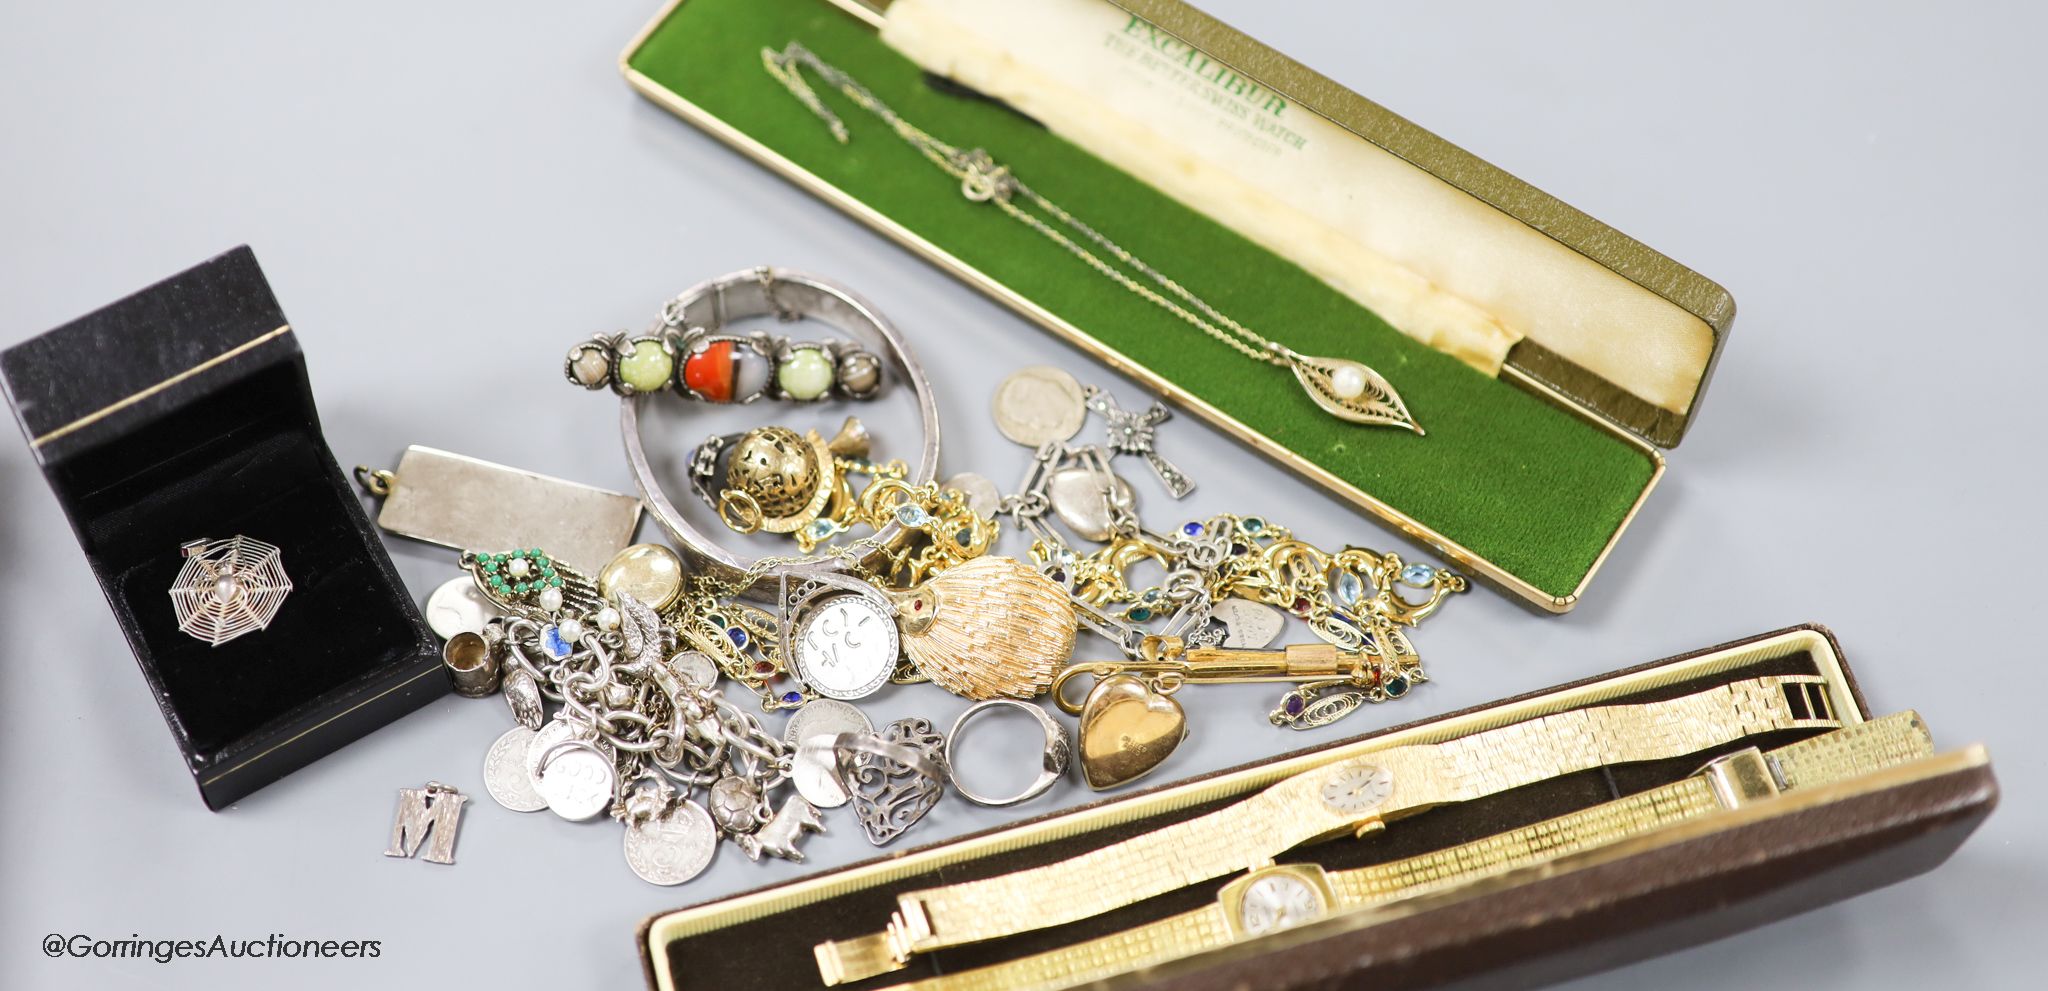 A small quantity of jewellery and watches including silver pendant, silver bracelet, two gold plated watches, costume jewellery etc.